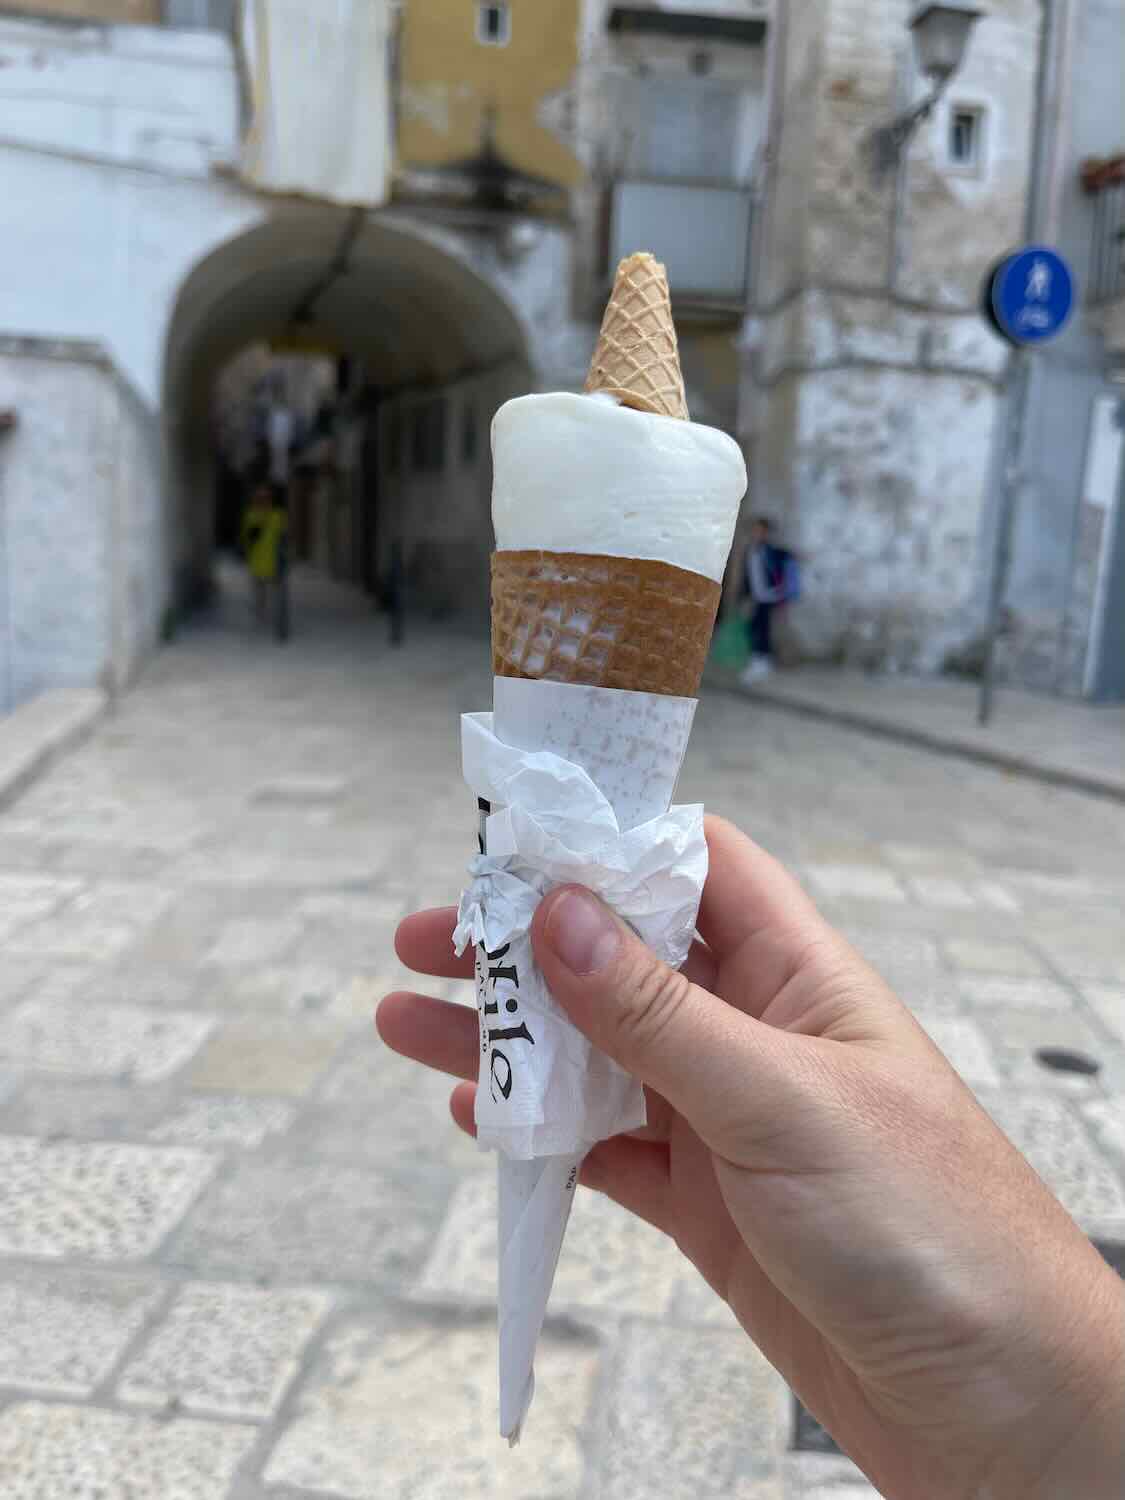 A hand holding a cone of gelato with a wafer cone, set against a background of a narrow stone-paved street in Bari, Italy. The buildings are old and weathered, adding to the rustic charm.